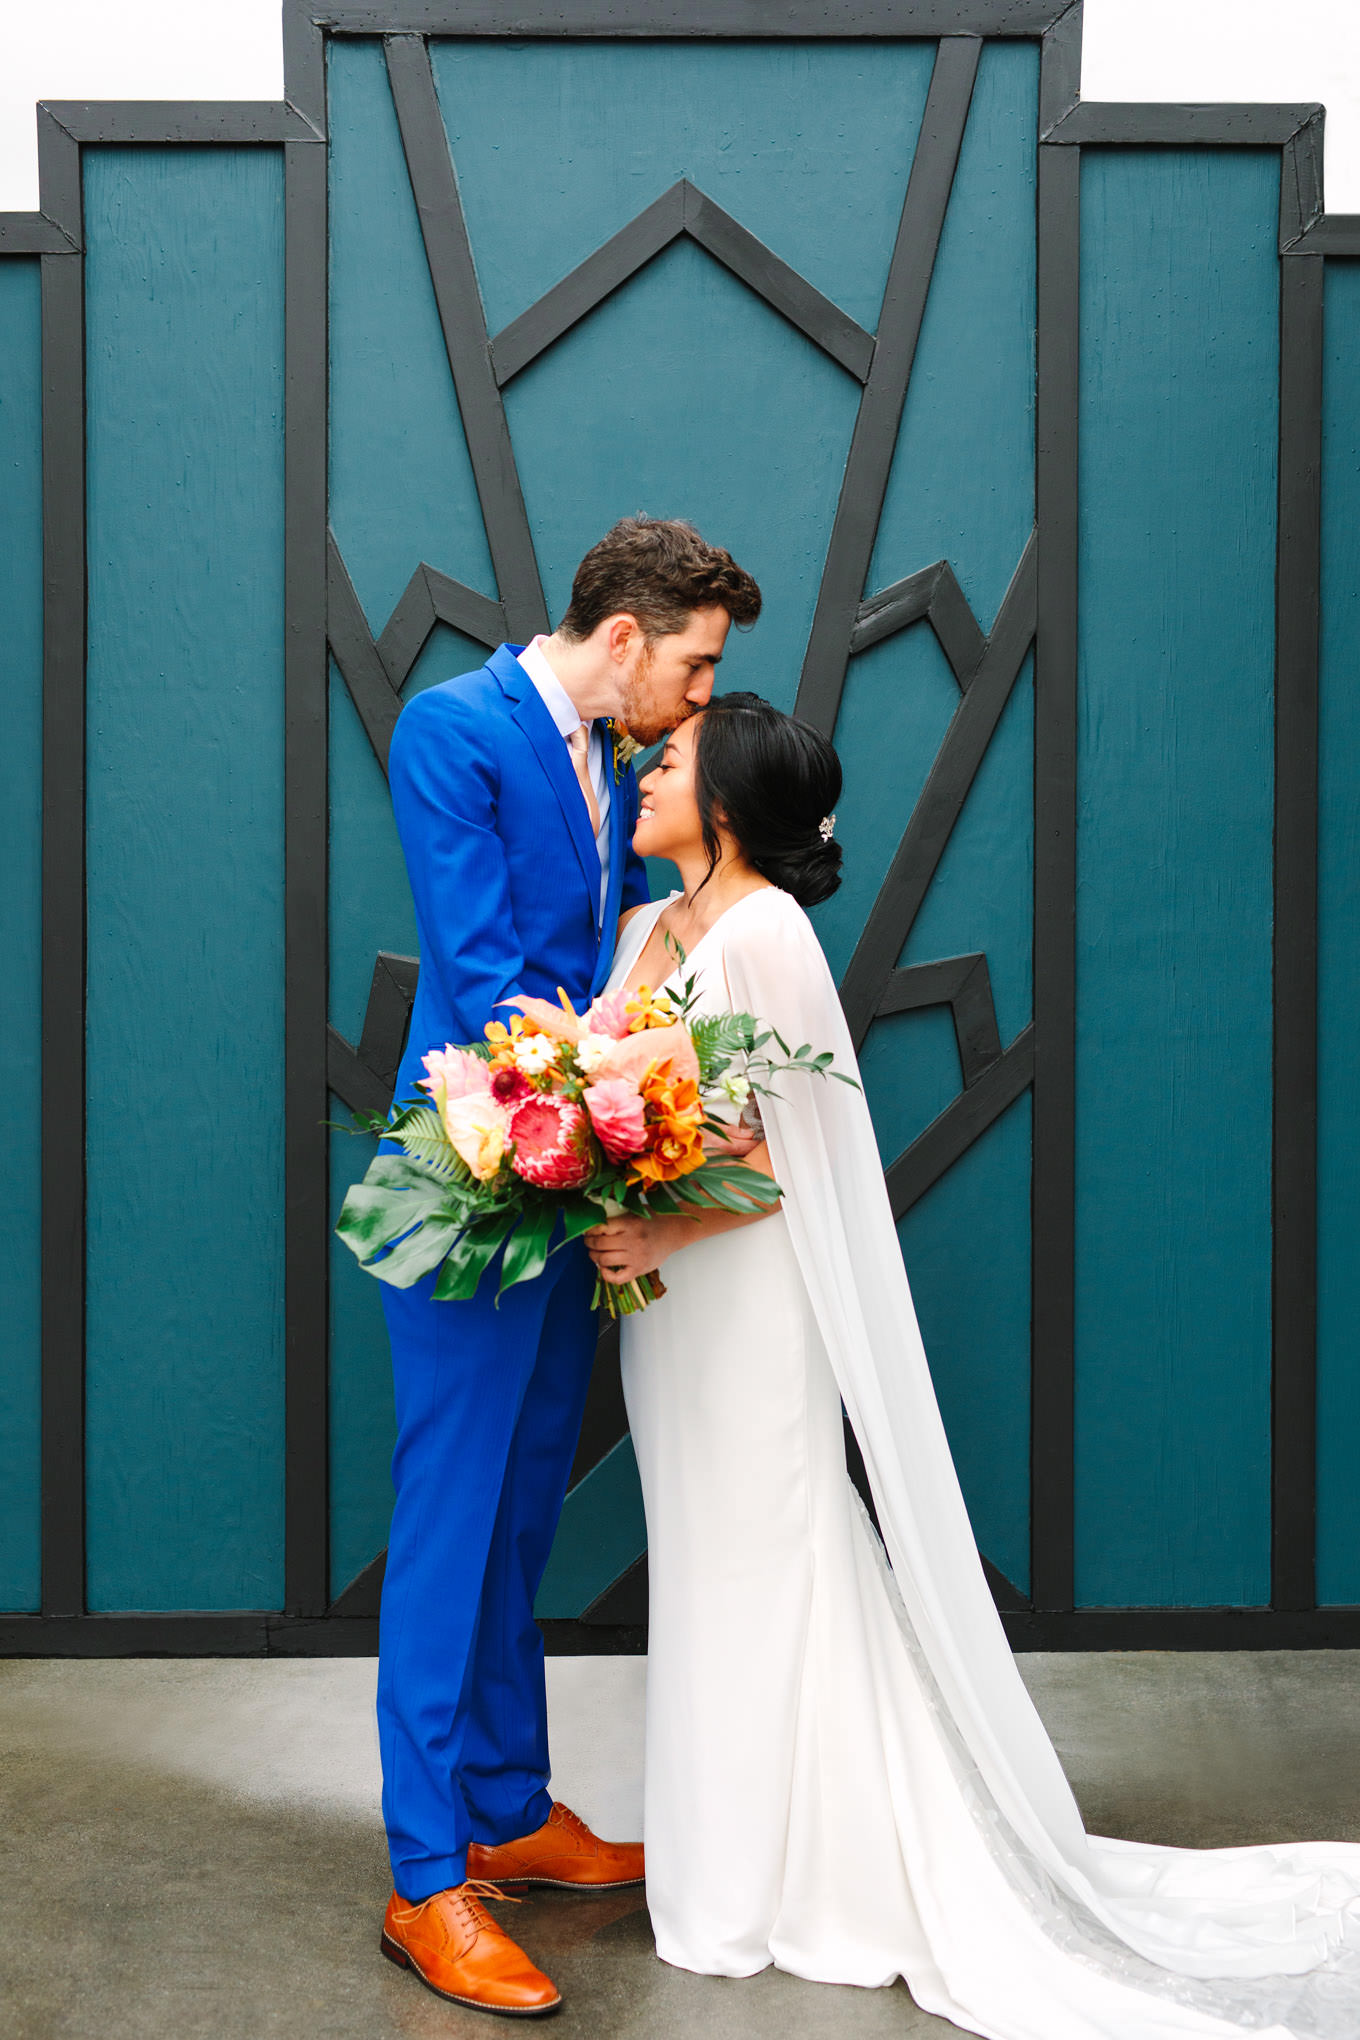 Bride and groom in front of teal geometric gate | TV inspired wedding at The Fig House Los Angeles | Published on The Knot | Fresh and colorful photography for fun-loving couples in Southern California | #losangeleswedding #TVwedding #colorfulwedding #theknot   Source: Mary Costa Photography | Los Angeles wedding photographer